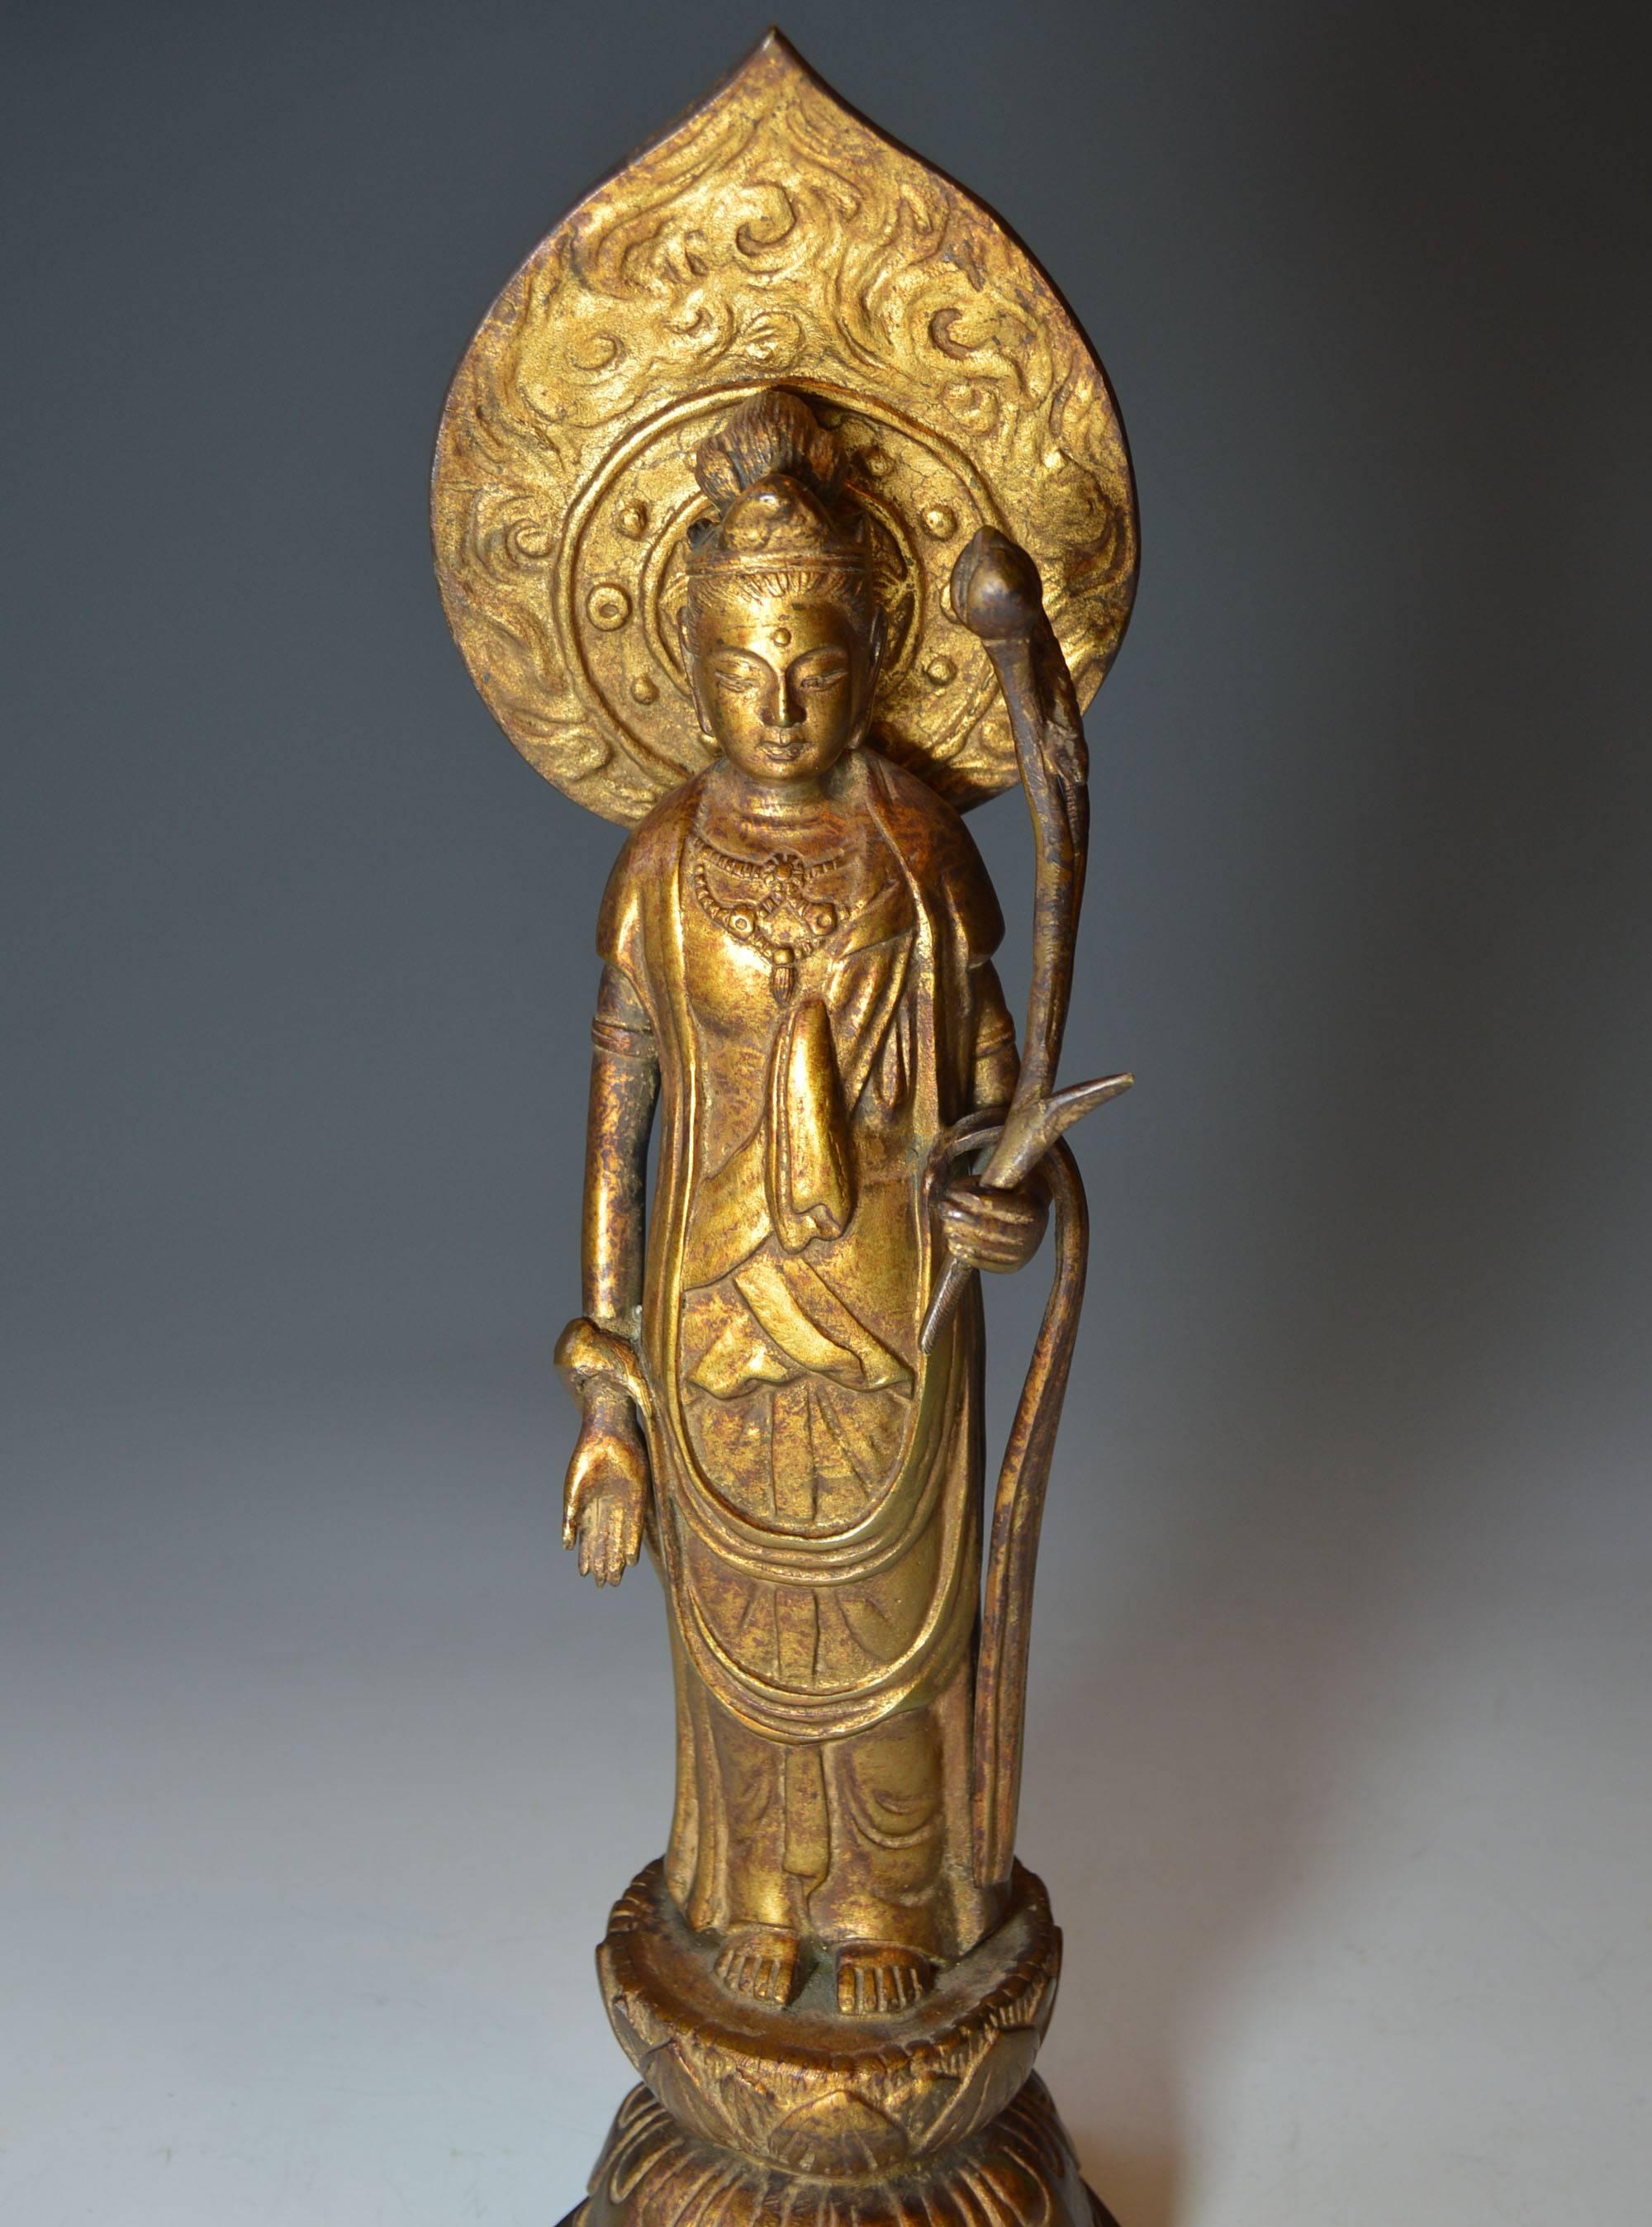 A superb large vintage signed Japanese bronze Kannon Guanyin Okimono

A very fine example of a Japanese Okimono of the Buddhist Bodhisattva Guanyin

Period 1930s or earlier

Measures: Height 40 cm, width 12 cm, 15 1/2 x 5 inches, approx 6 kg